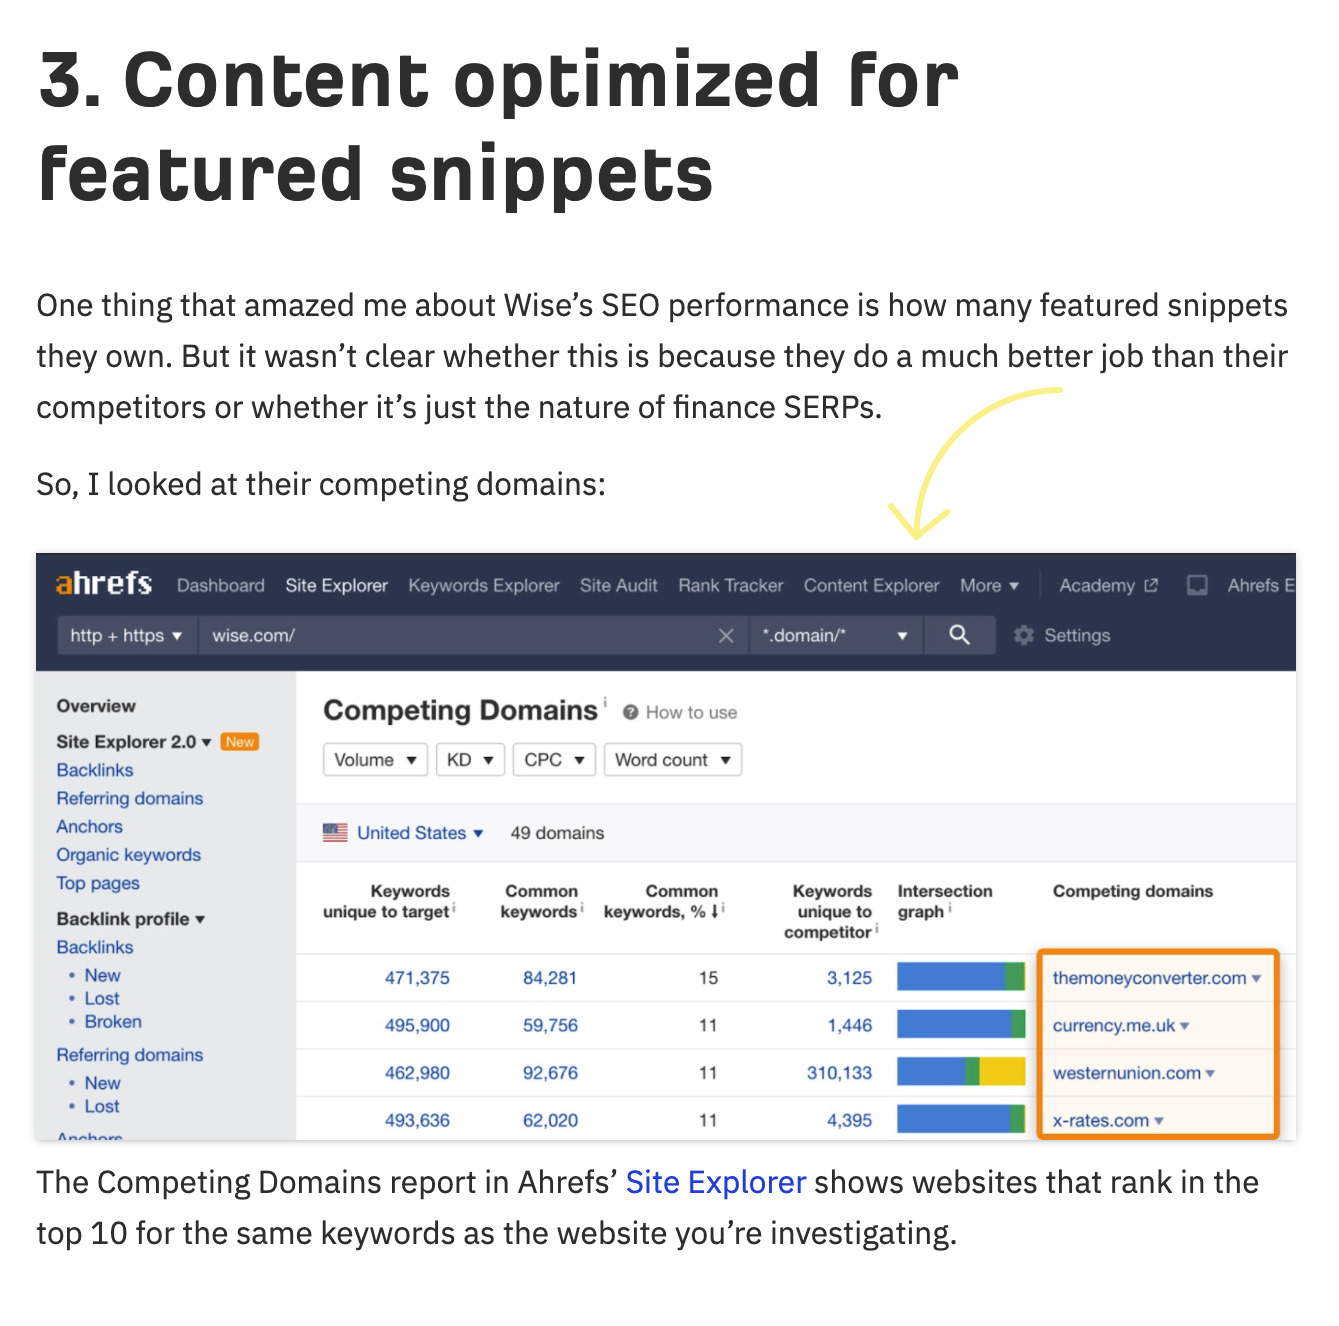 Excerpt of an Ahrefs article talking about content optimization for featured snippets